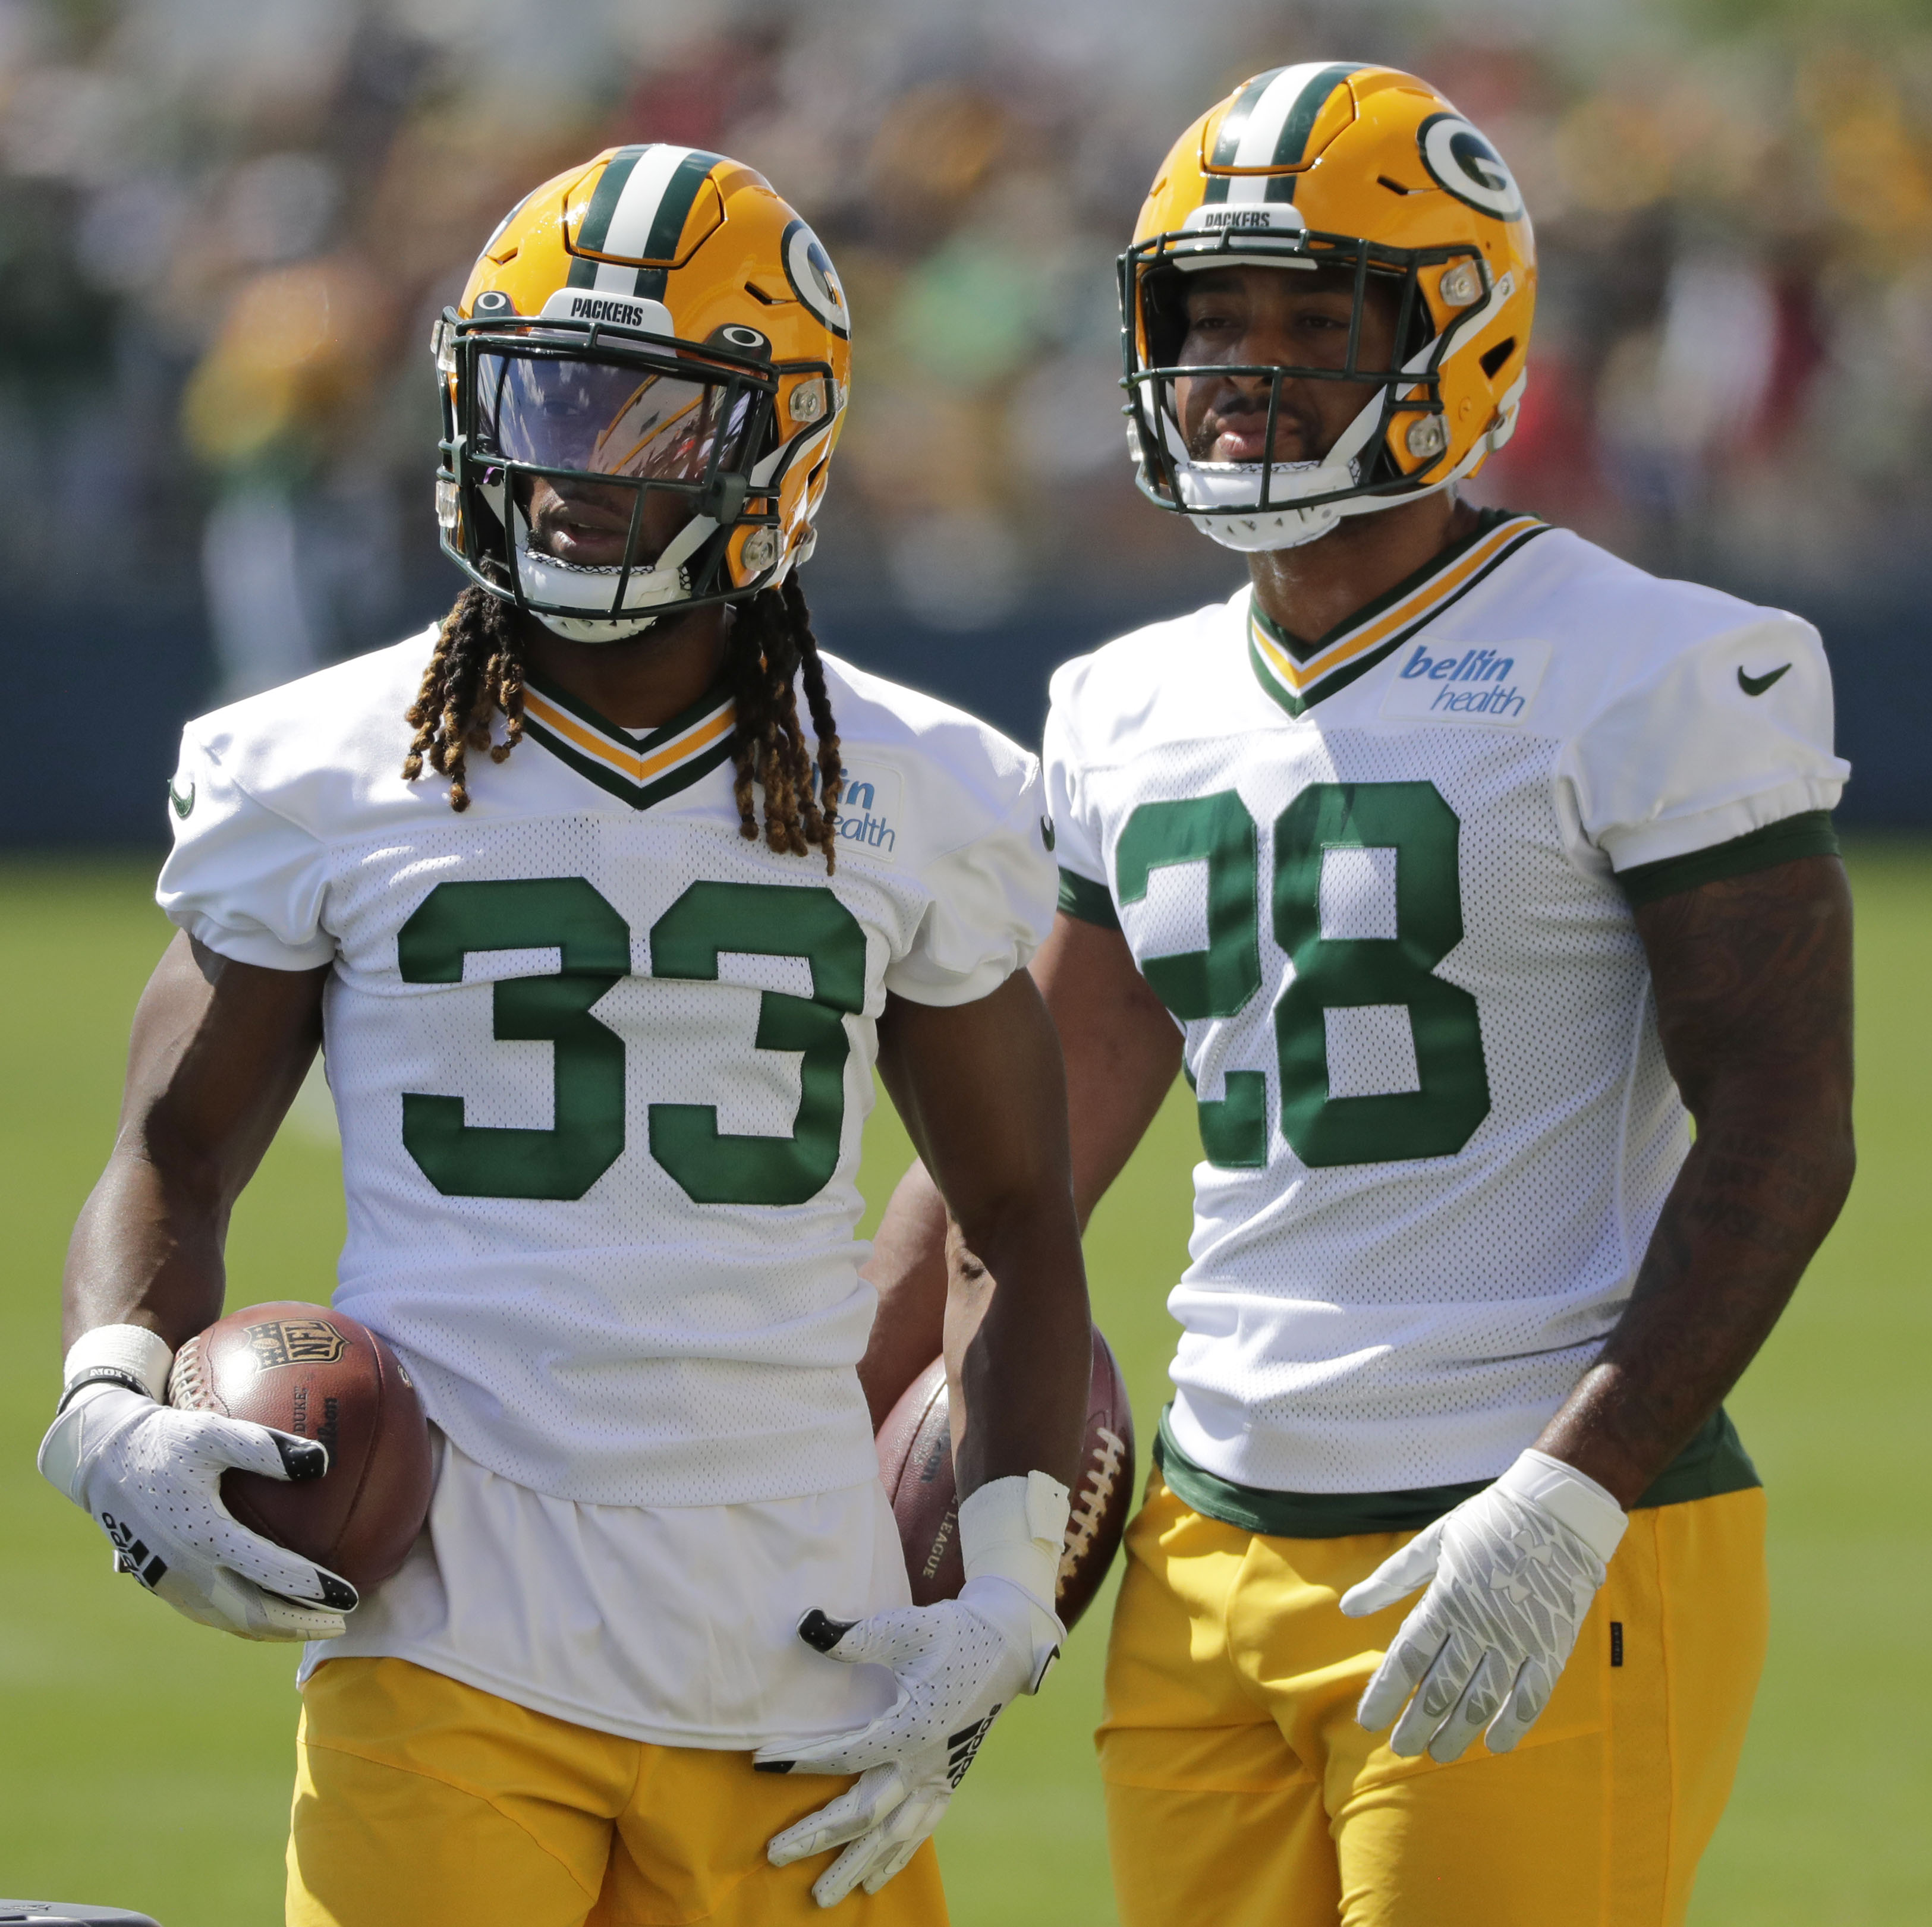 Packers running back AJ Dillon says he wants to make 'defenses